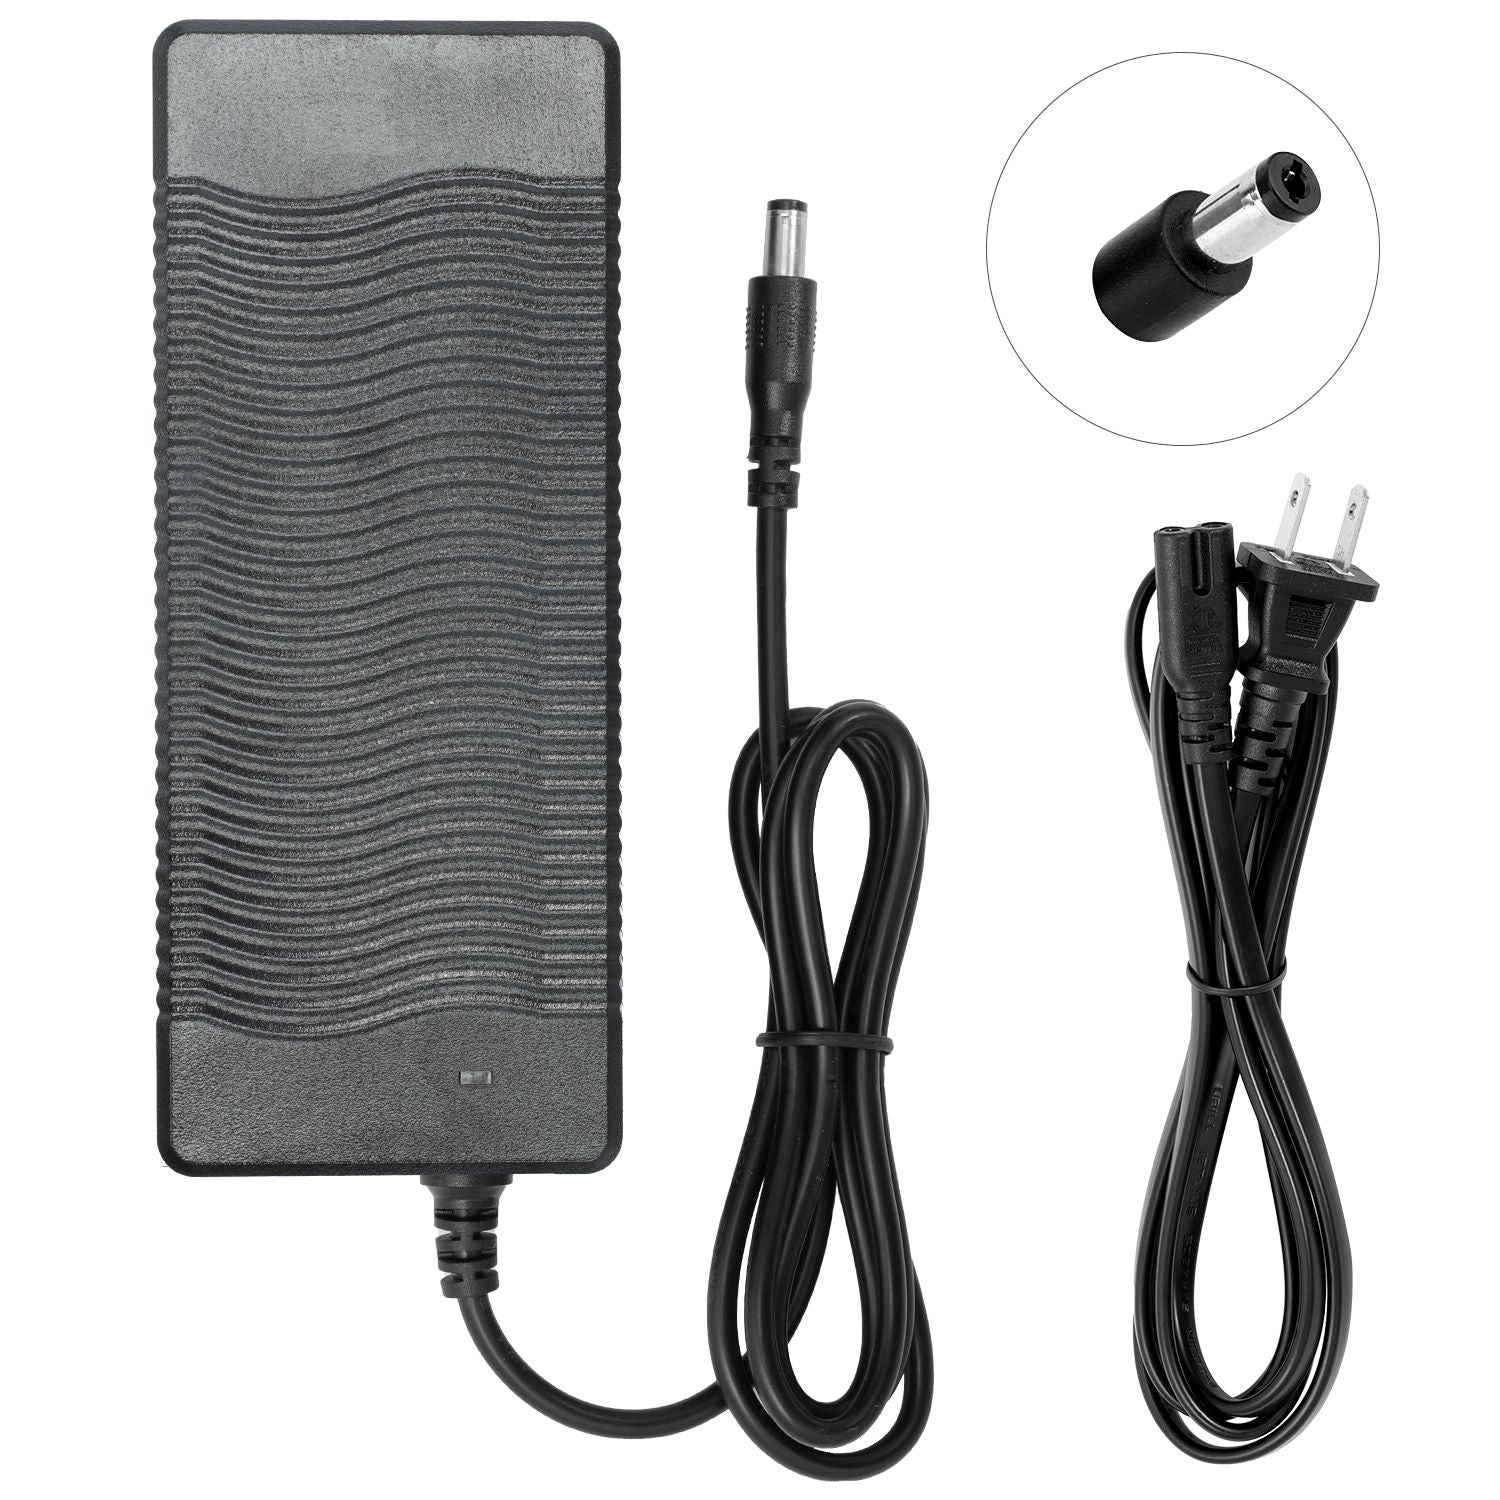 Charger for Rad Power RadExpand 5 eBike